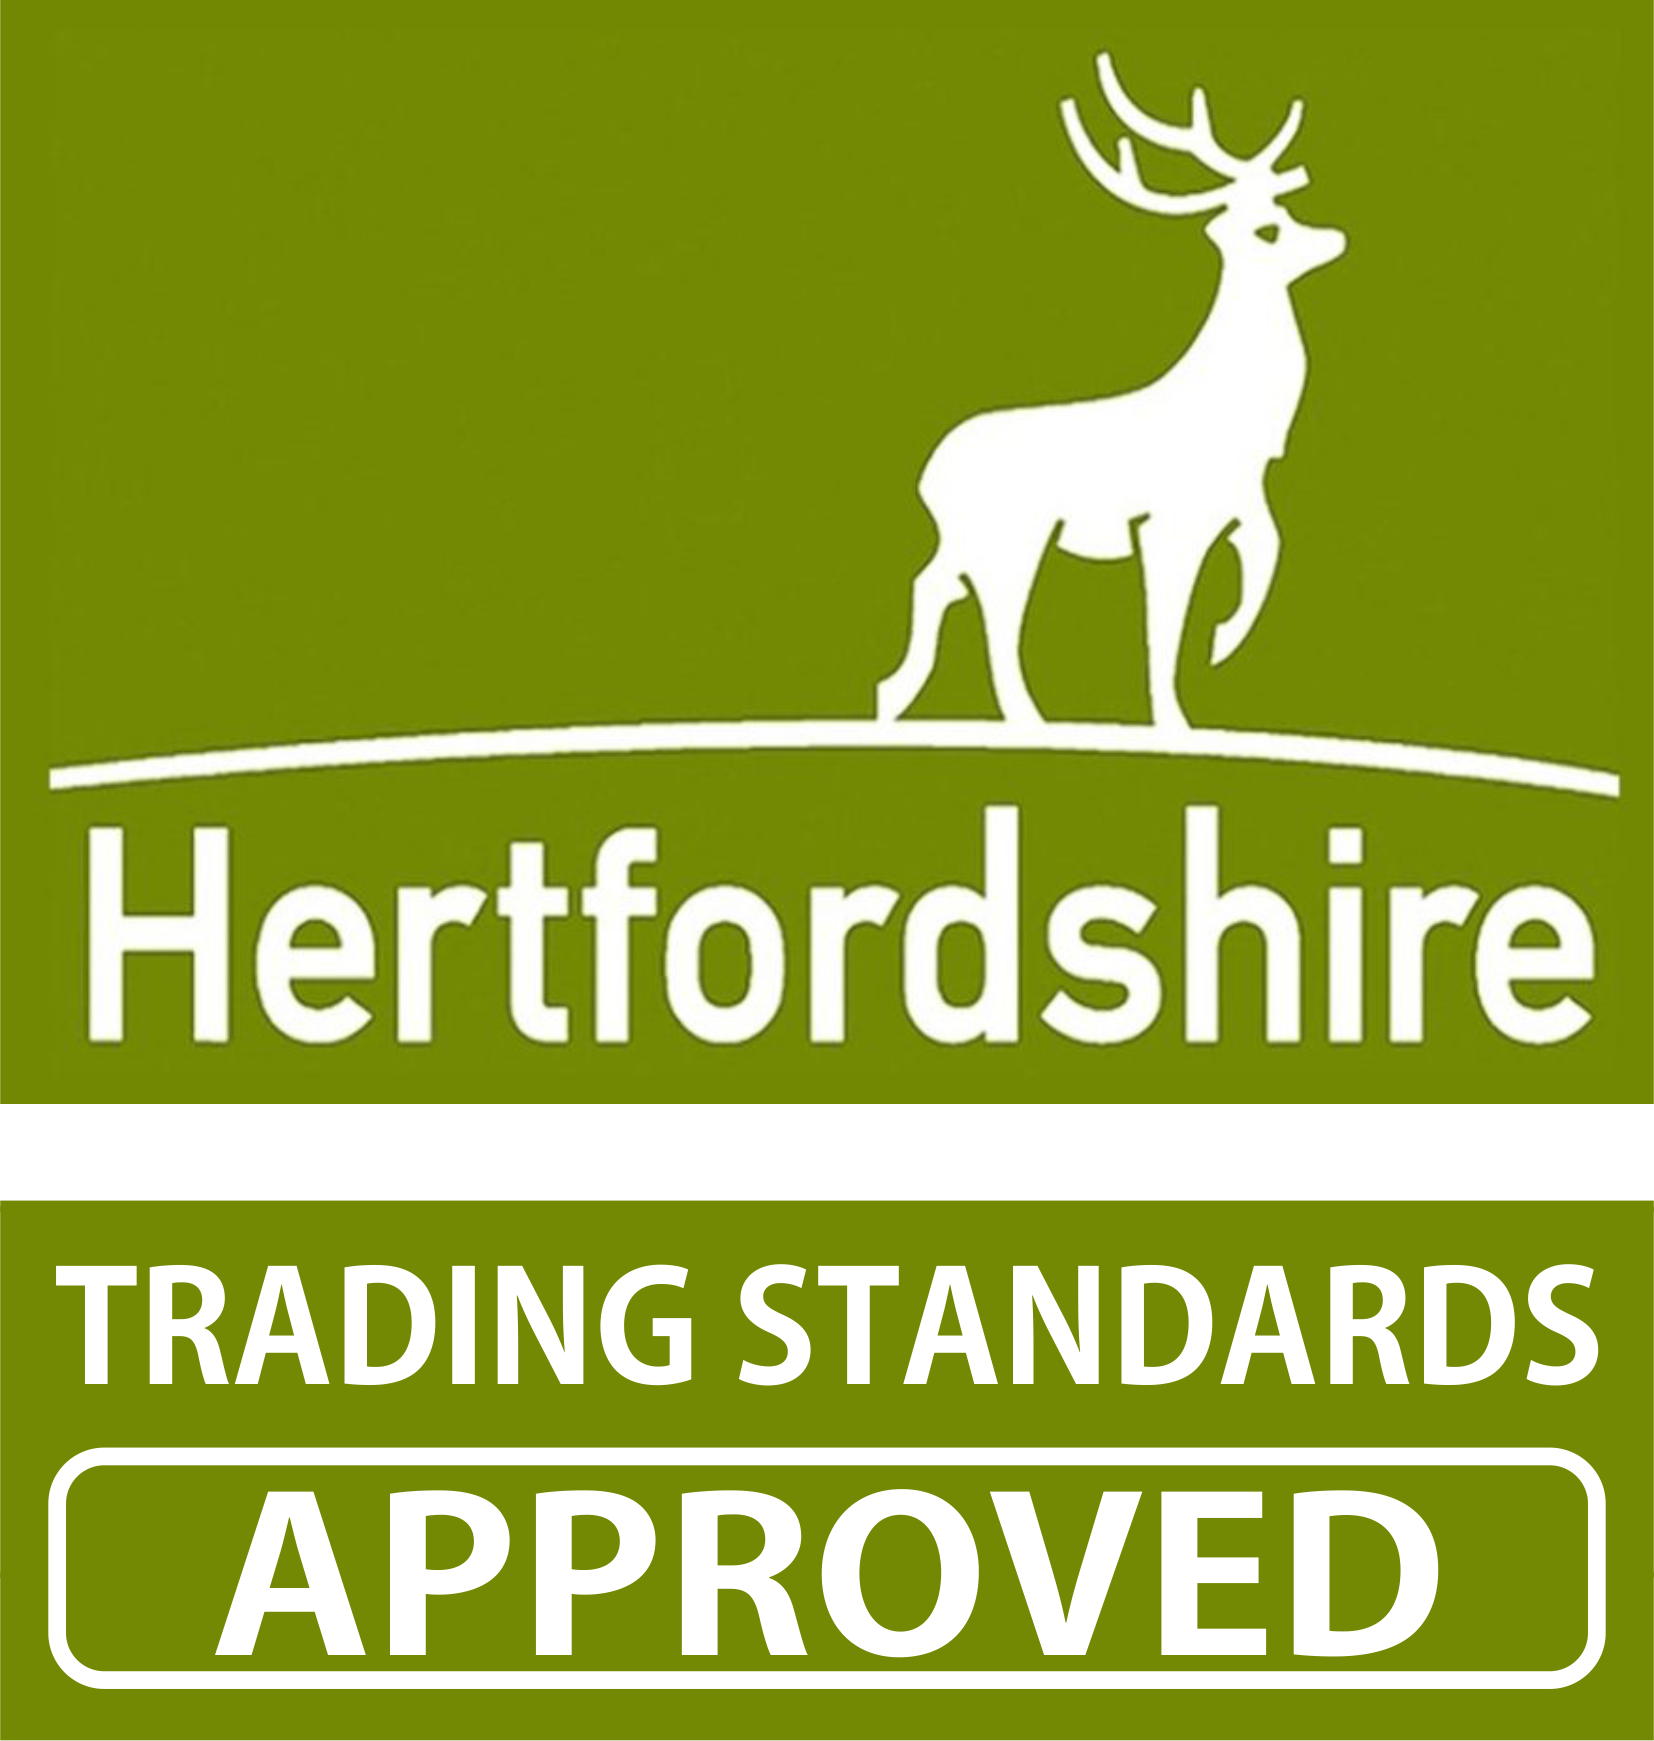 Hertfordshire Trading Standards Approved - One Call Building Services